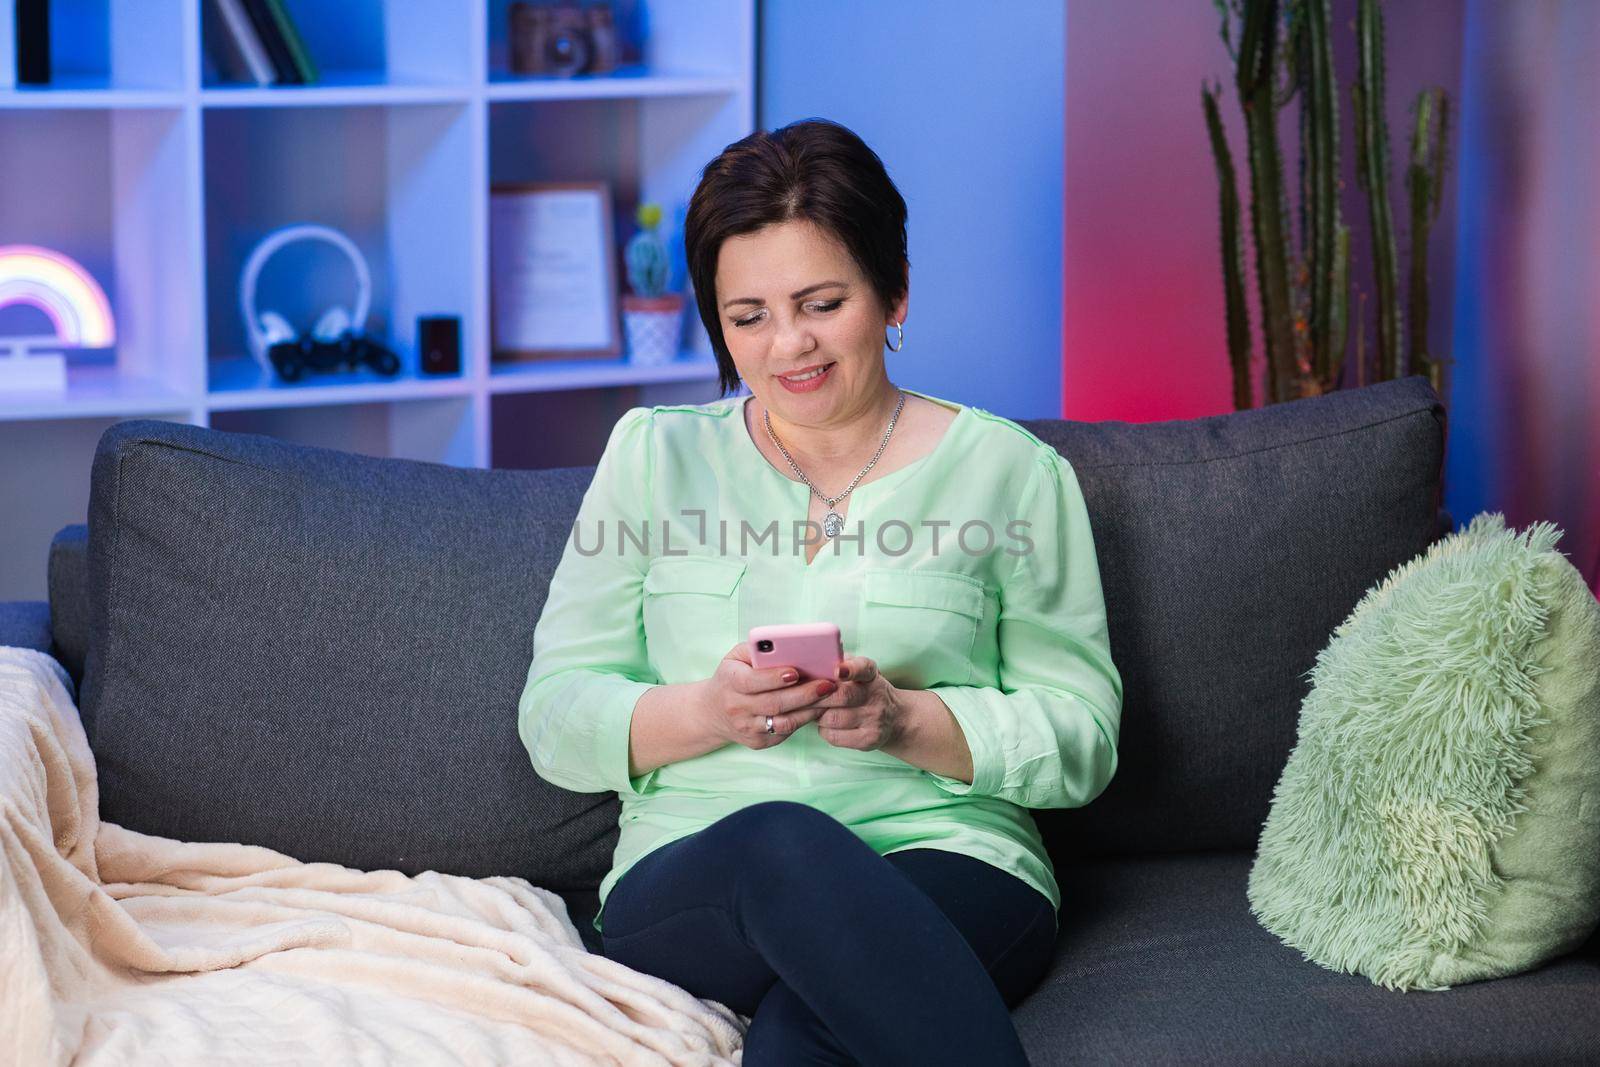 Caucasian Woman with Short Black Hair Sitting on Couch at Home, Holding Invisible Smartphone in Hand and Chatting with Someone by uflypro